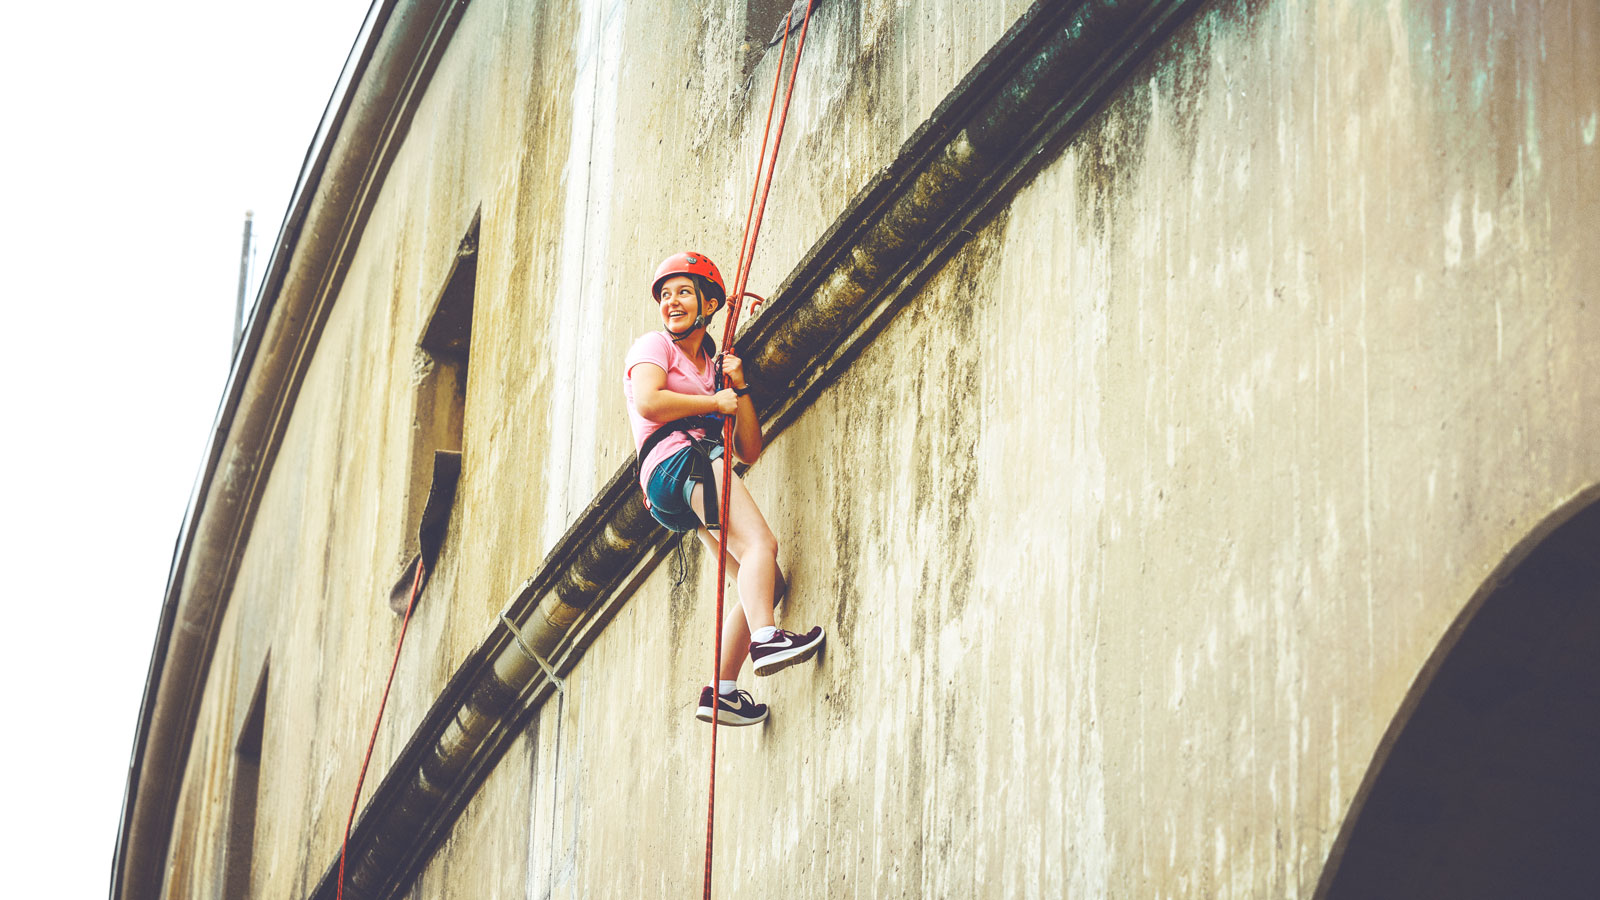 Rappelling down the outside wall of Schoellkopf Crescent is part of COE’s basic rock climbing curriculum—and a popular activity during Reunion and Cornell Days